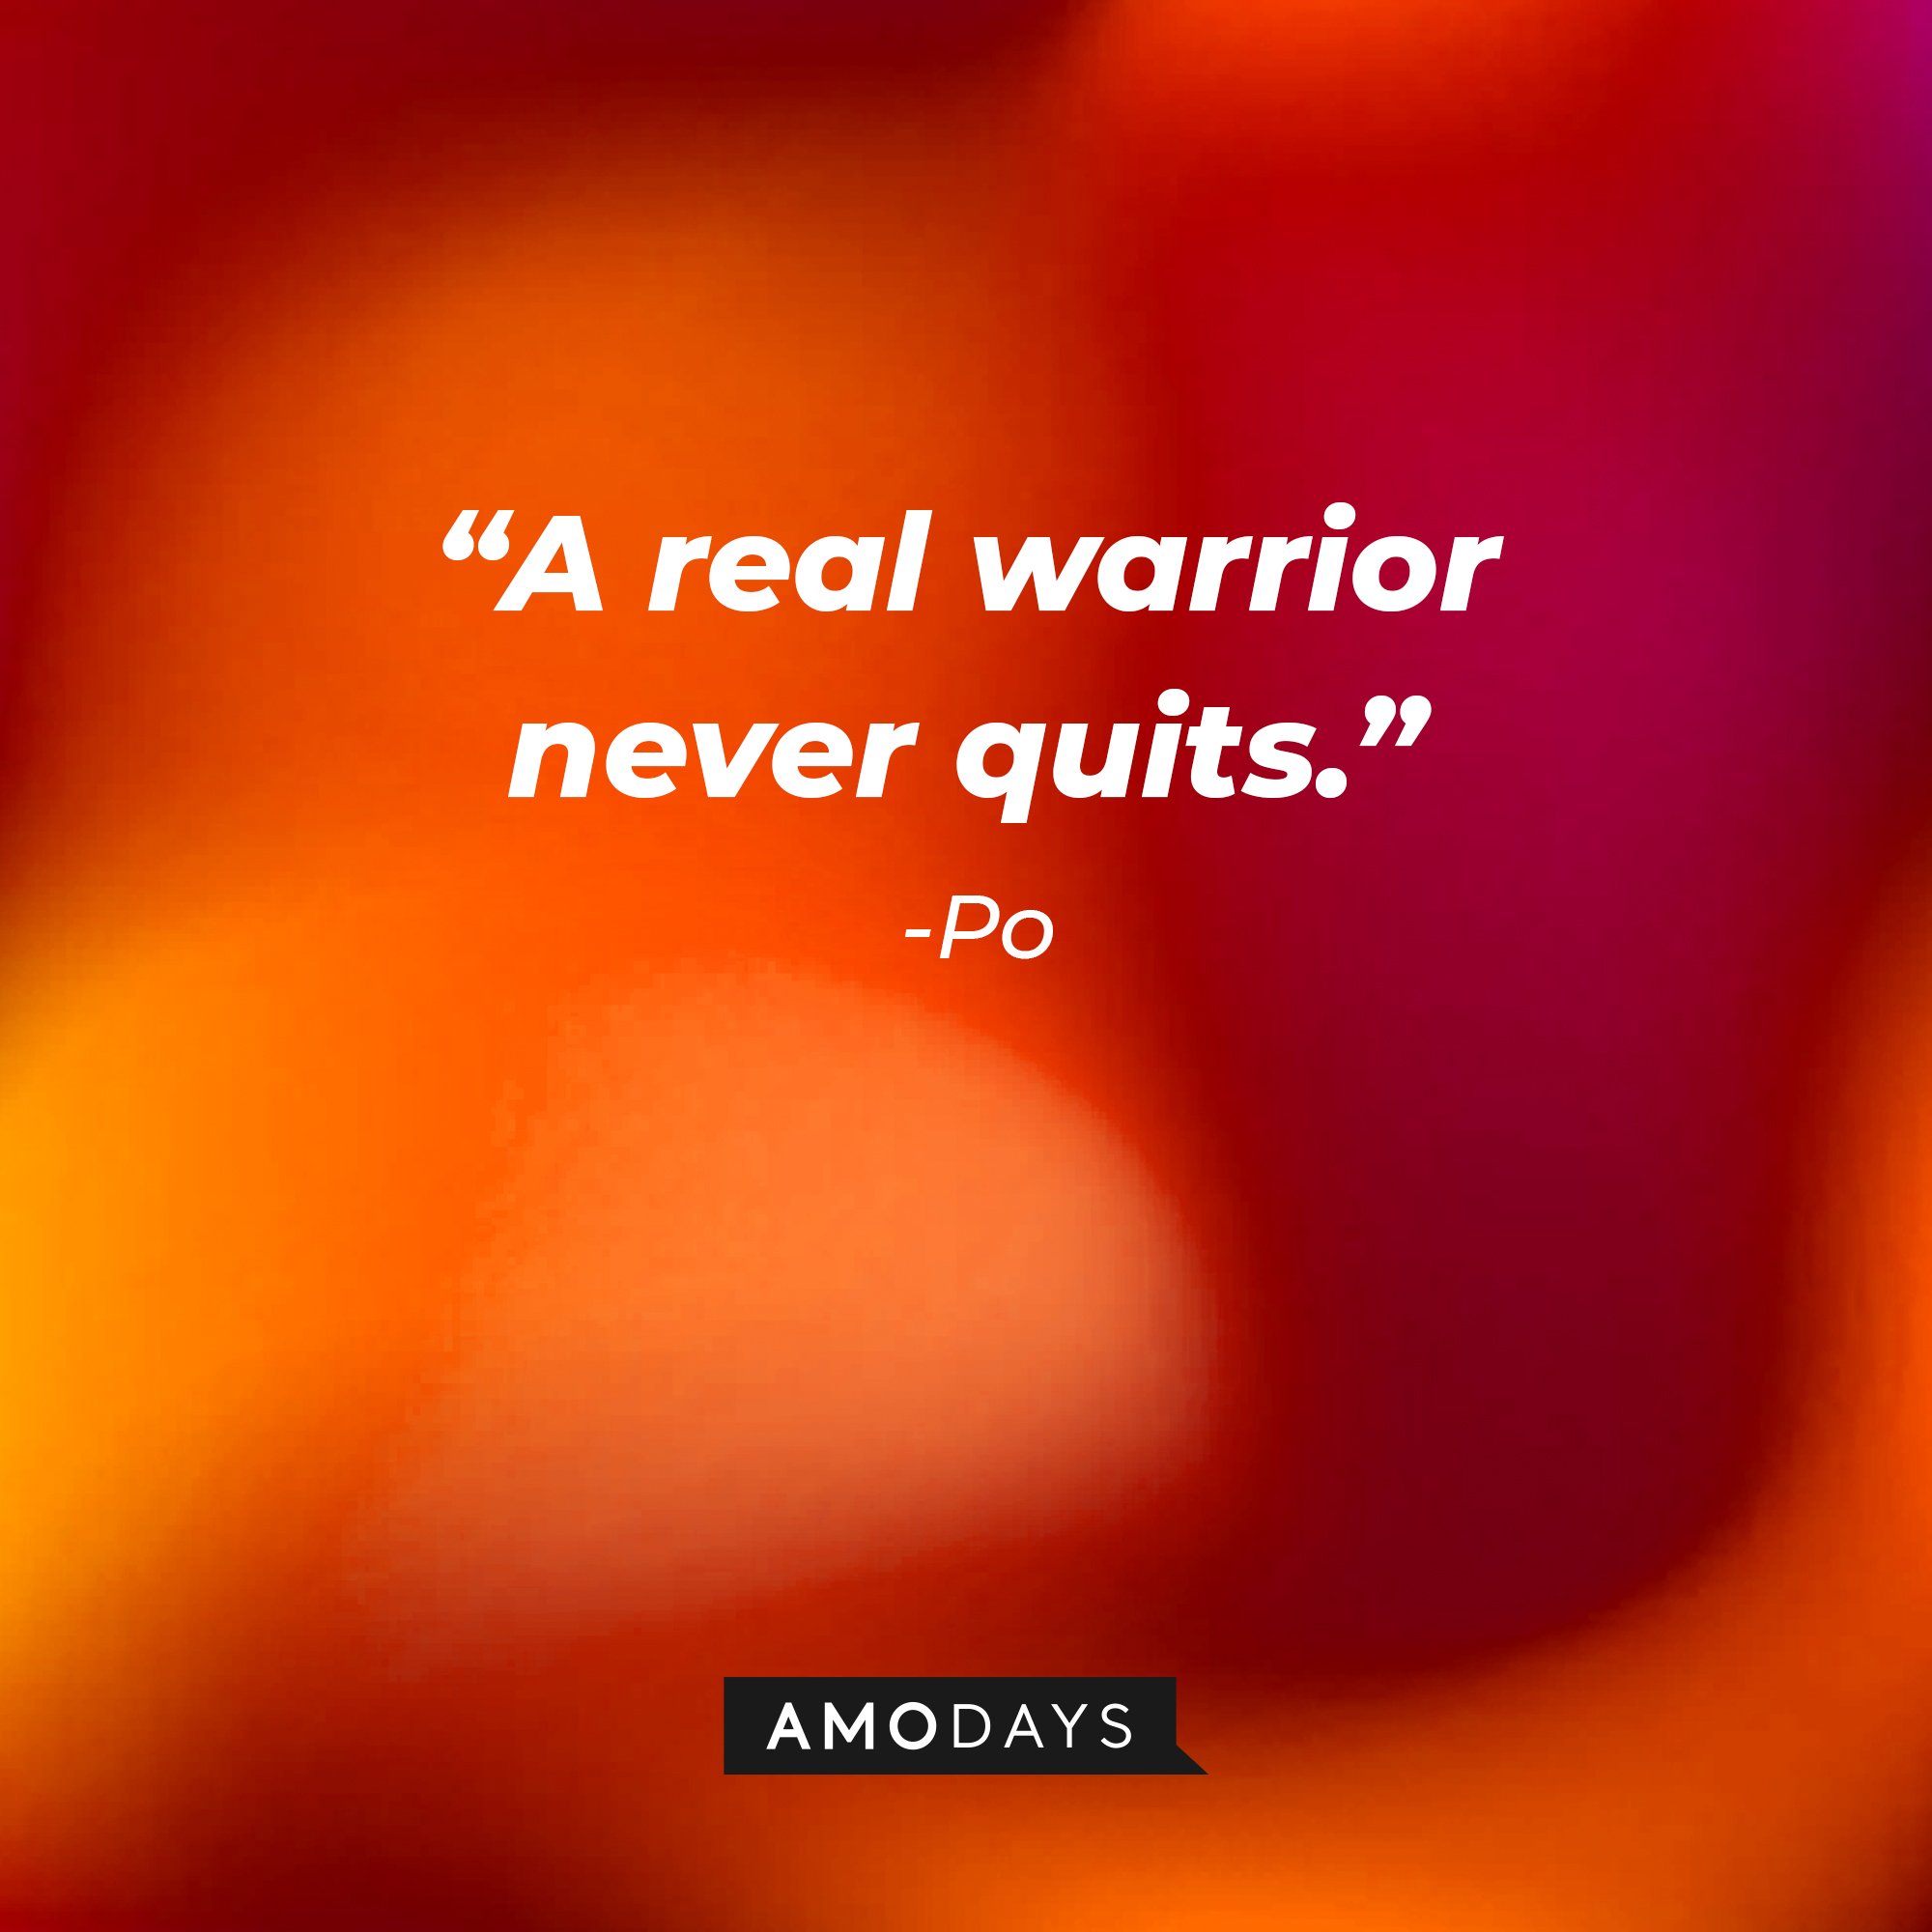 Po's quote: “A real warrior never quits.” | Image: AmoDays